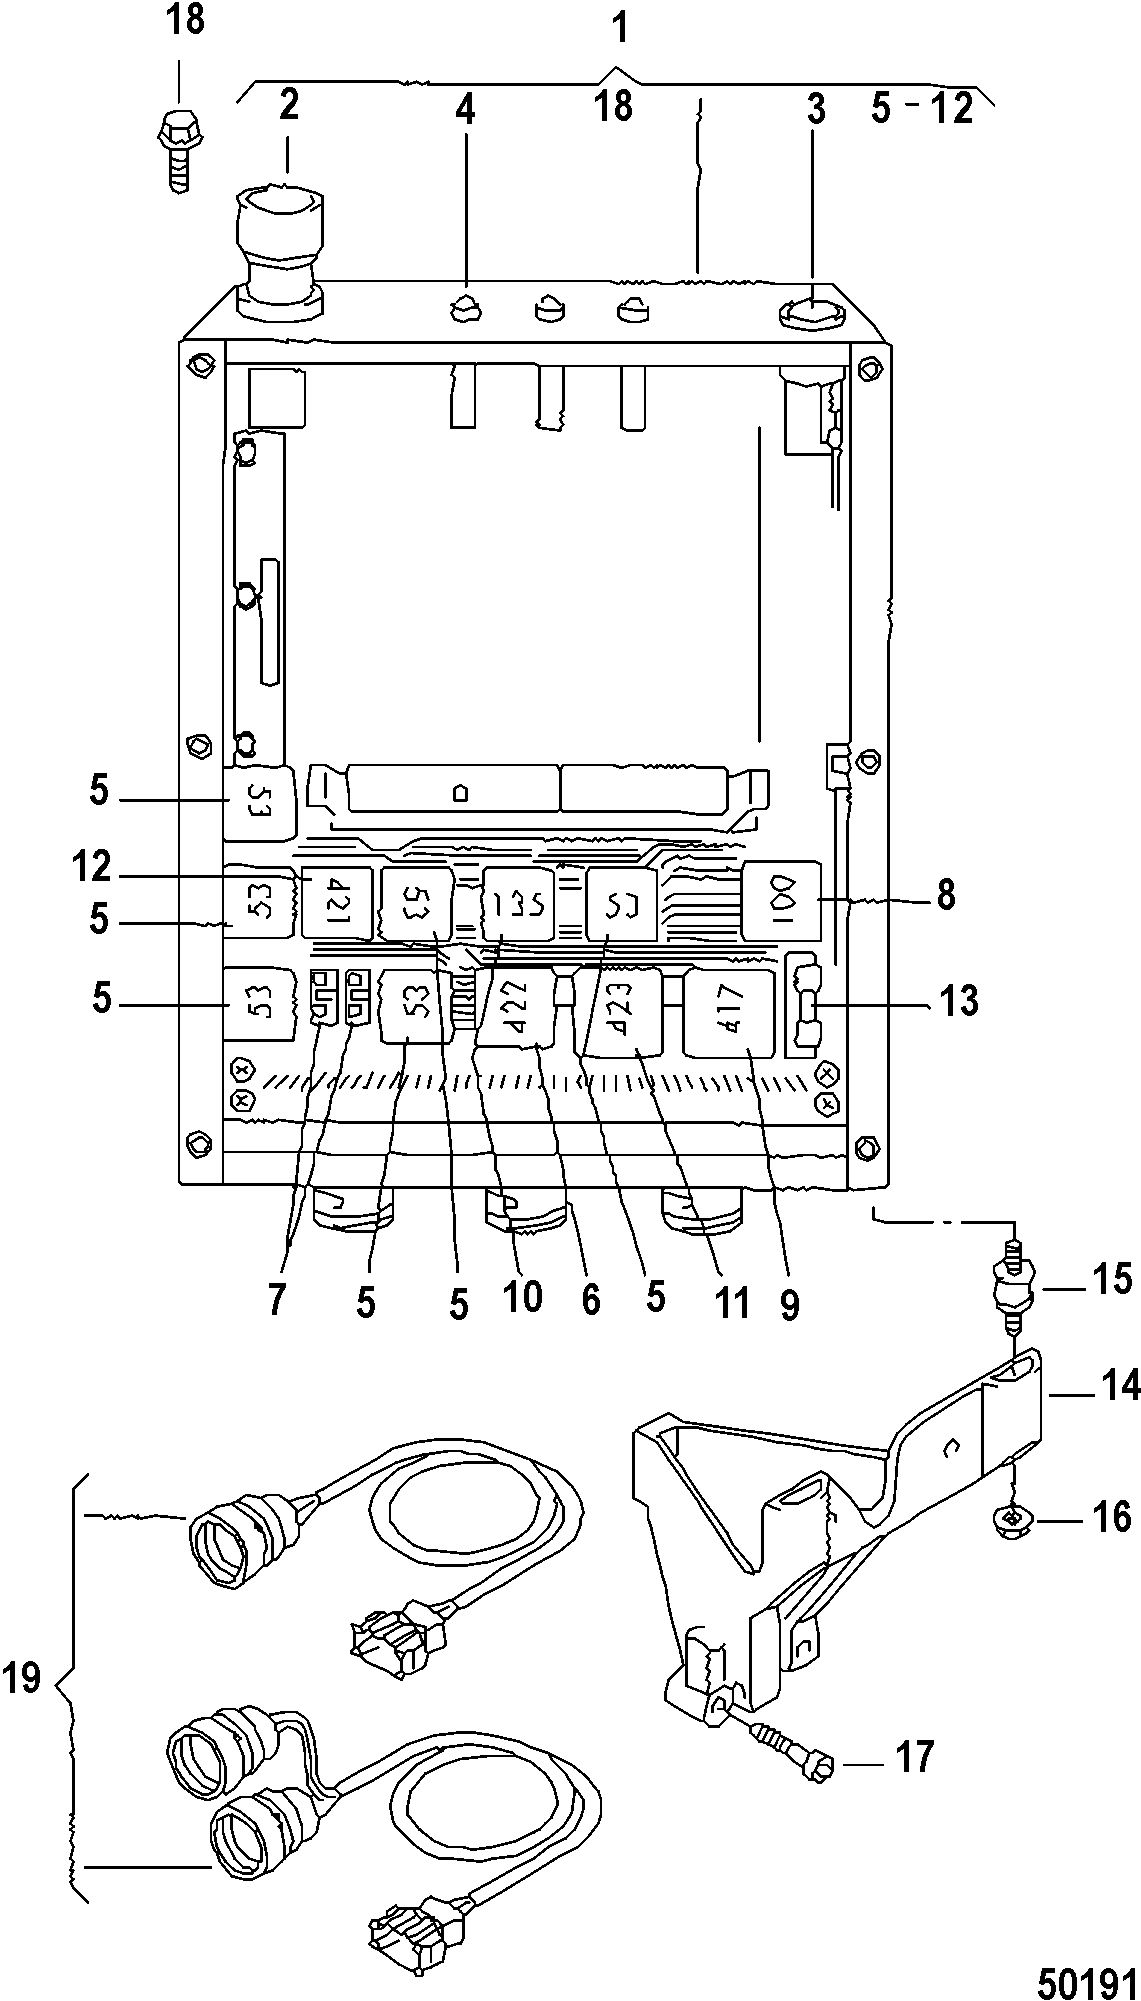 MERCRUISER VW 2.5L ELECTRICAL COMPONENTS, From: Dec. 2004; All 2.5L Models